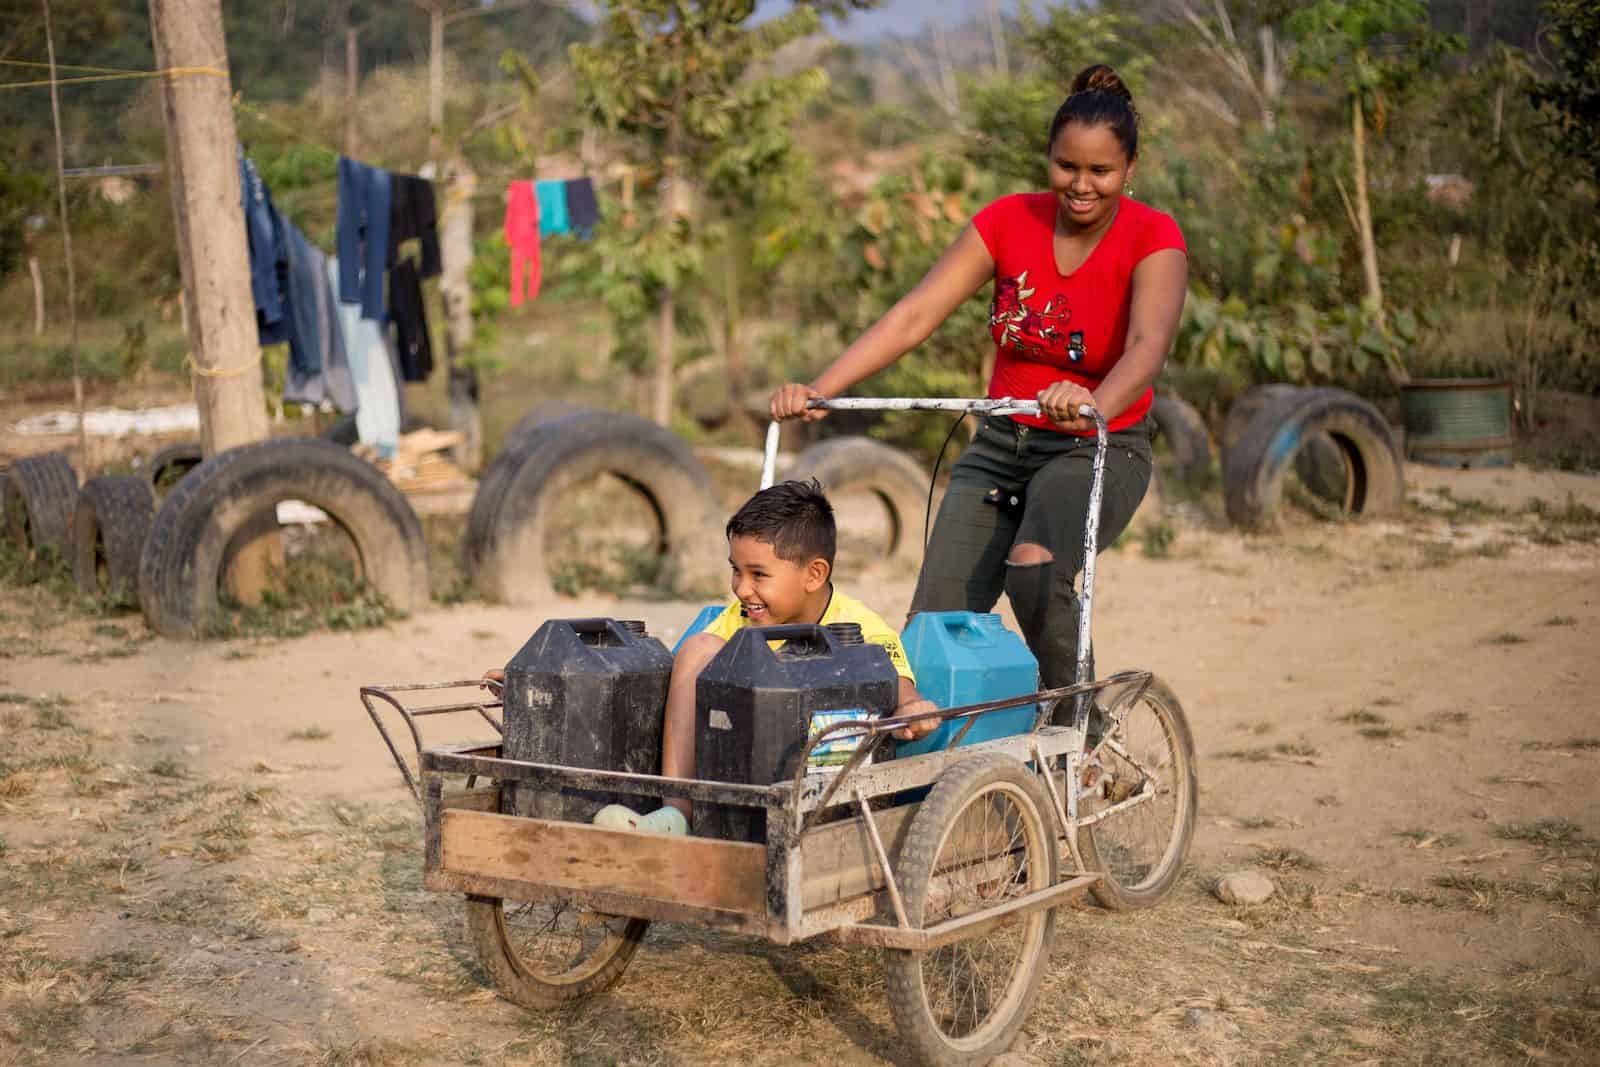 A boy rides in a tricycle cart holding water jugs, as a woman pedals.